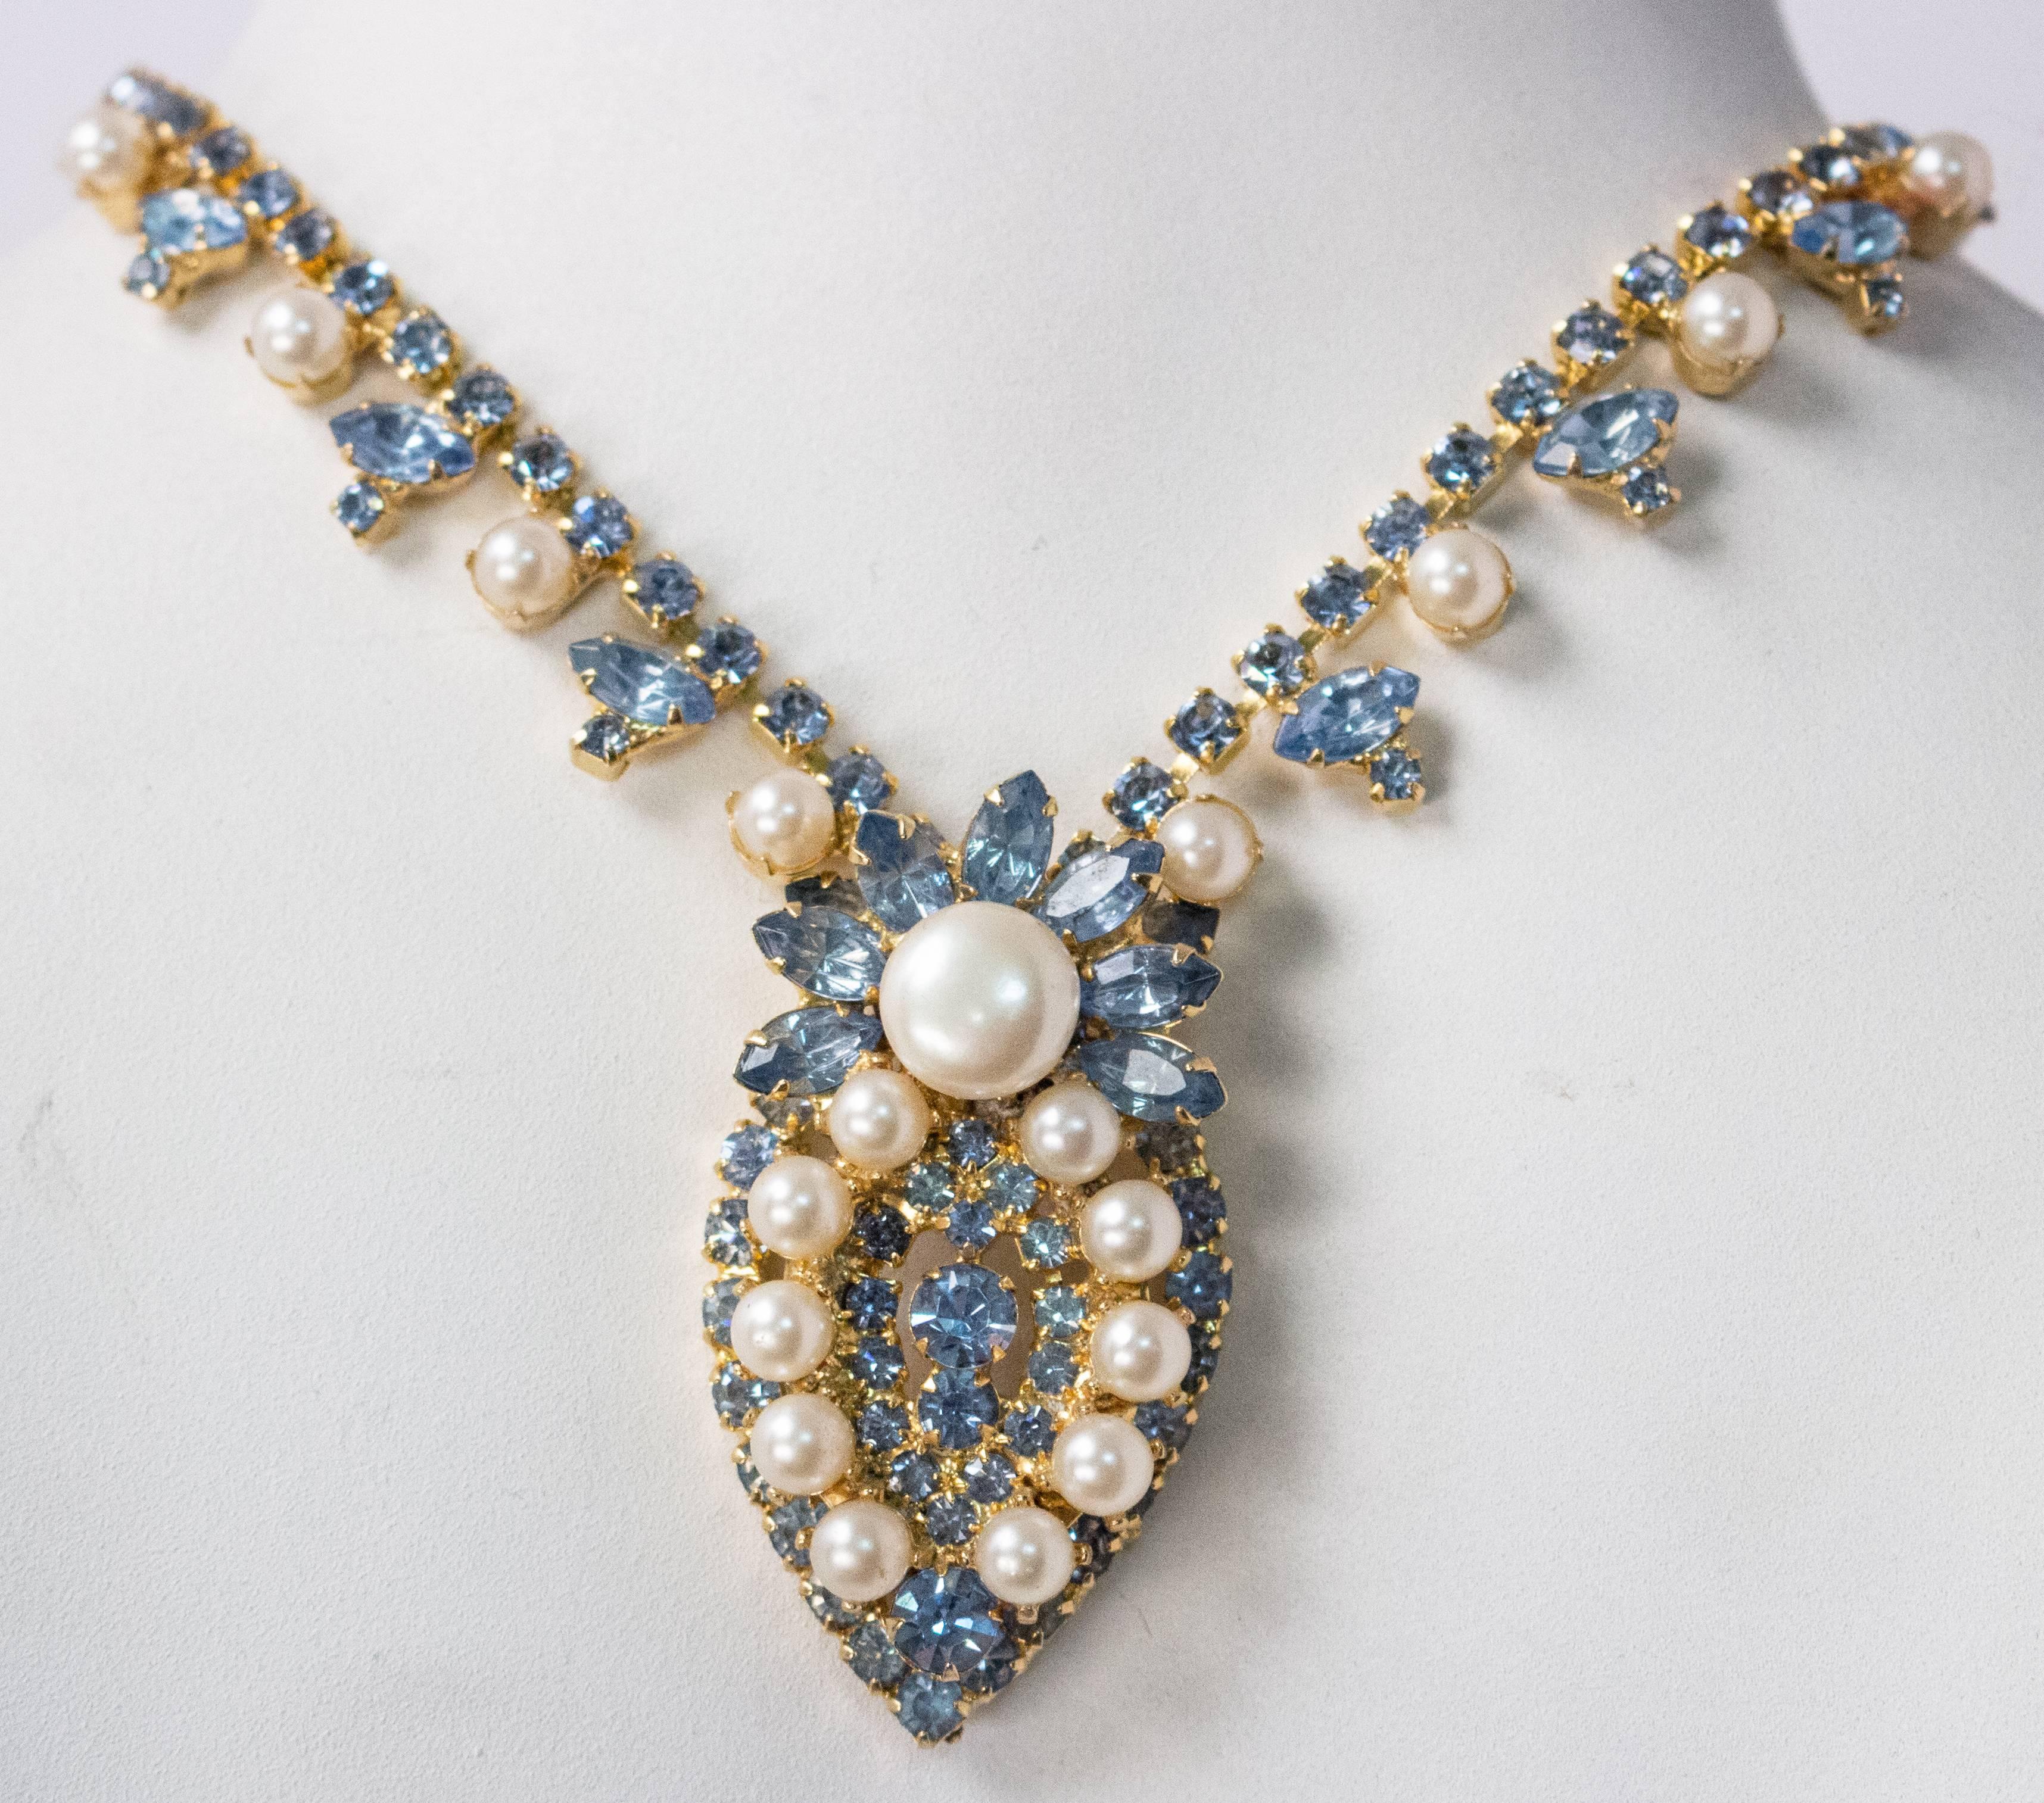 50s Blue Rhinestone and Faux Pearl Necklace. Gold tone hardware. Adjustable length.